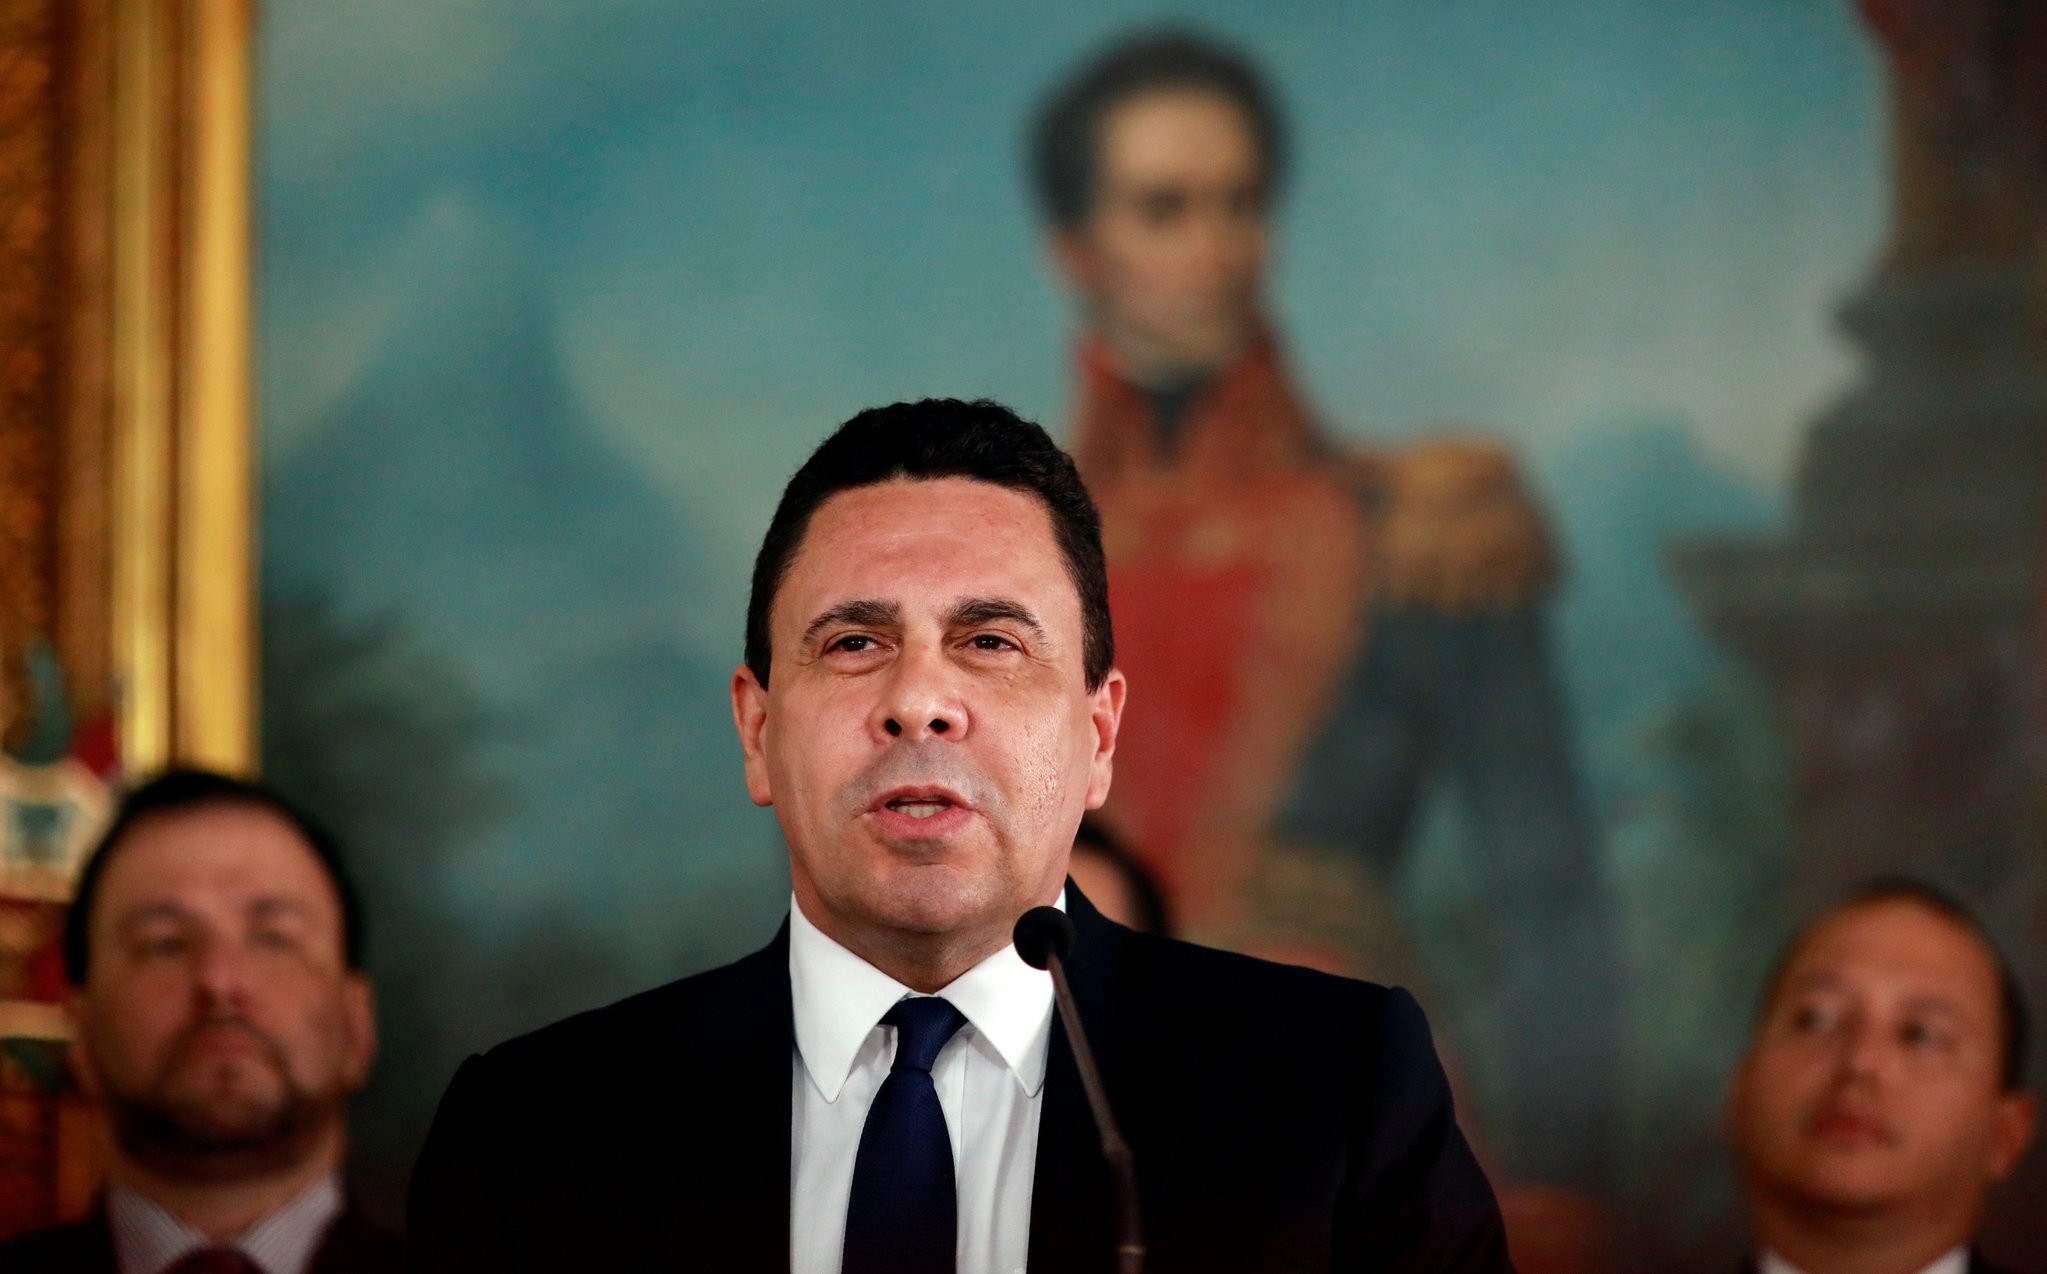 Venezuelan Foreign Minister Samuel Moncada talks to the media during a news conference in Caracas, July 18, 2017. (REUTERS Photo)